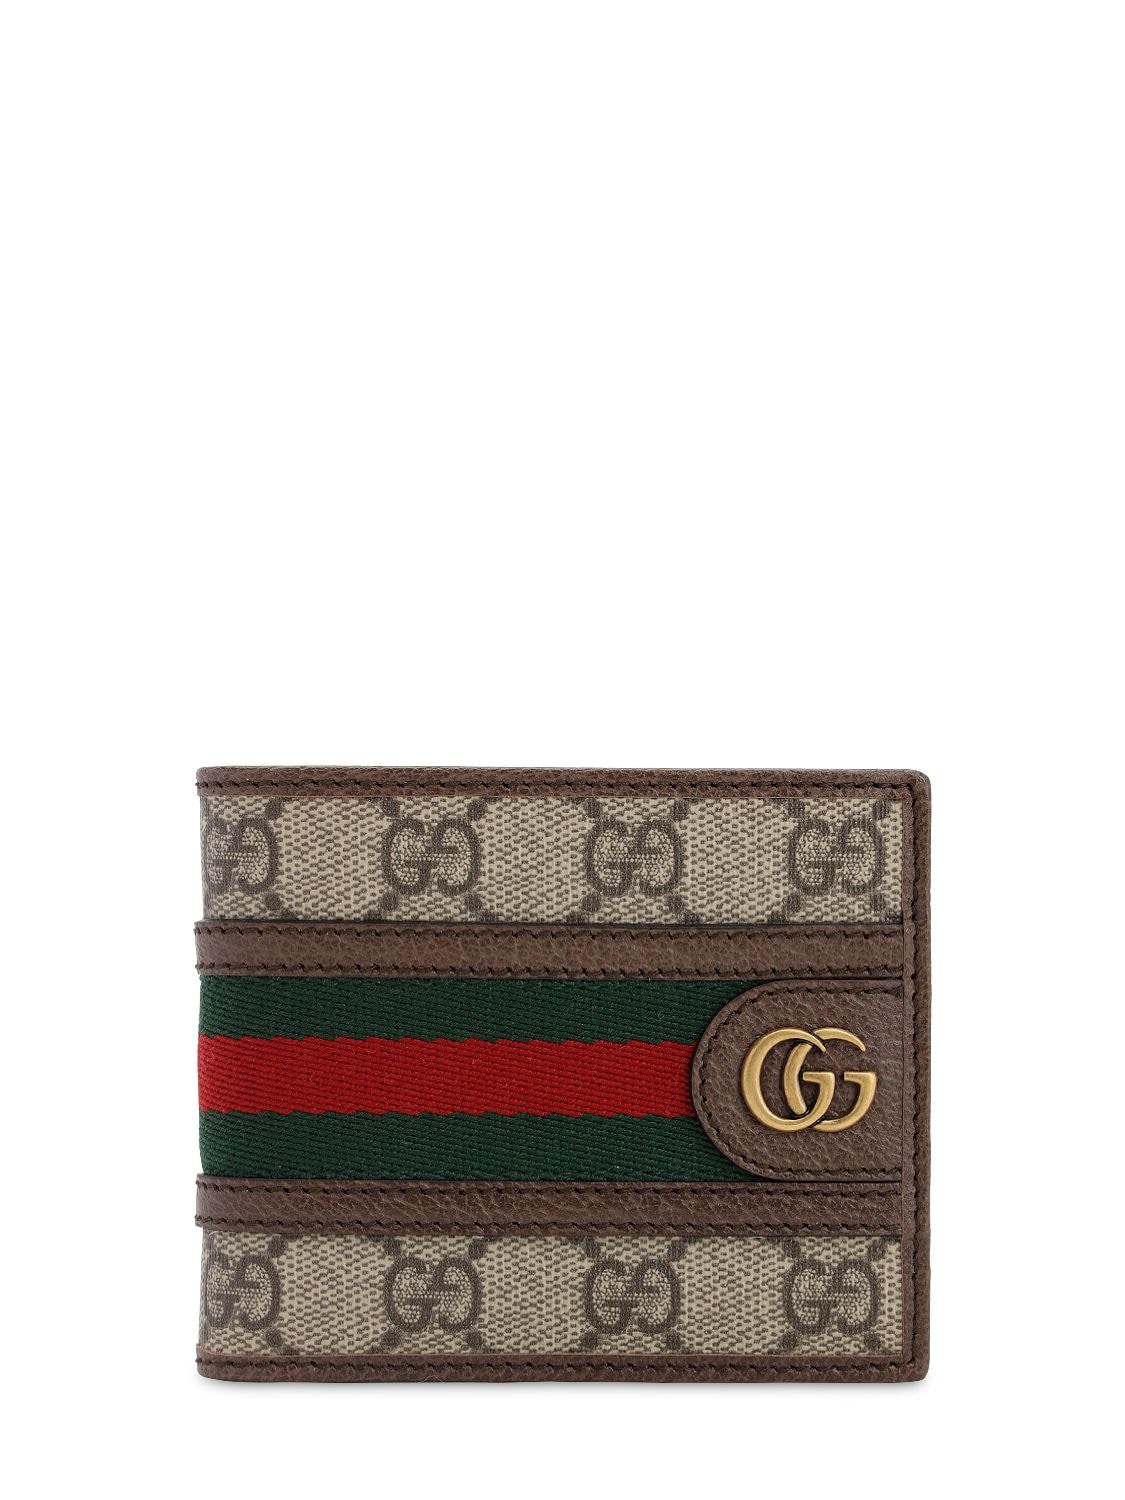 Gucci Ophidia Gg Supreme Coated Classic Wallet In Beige